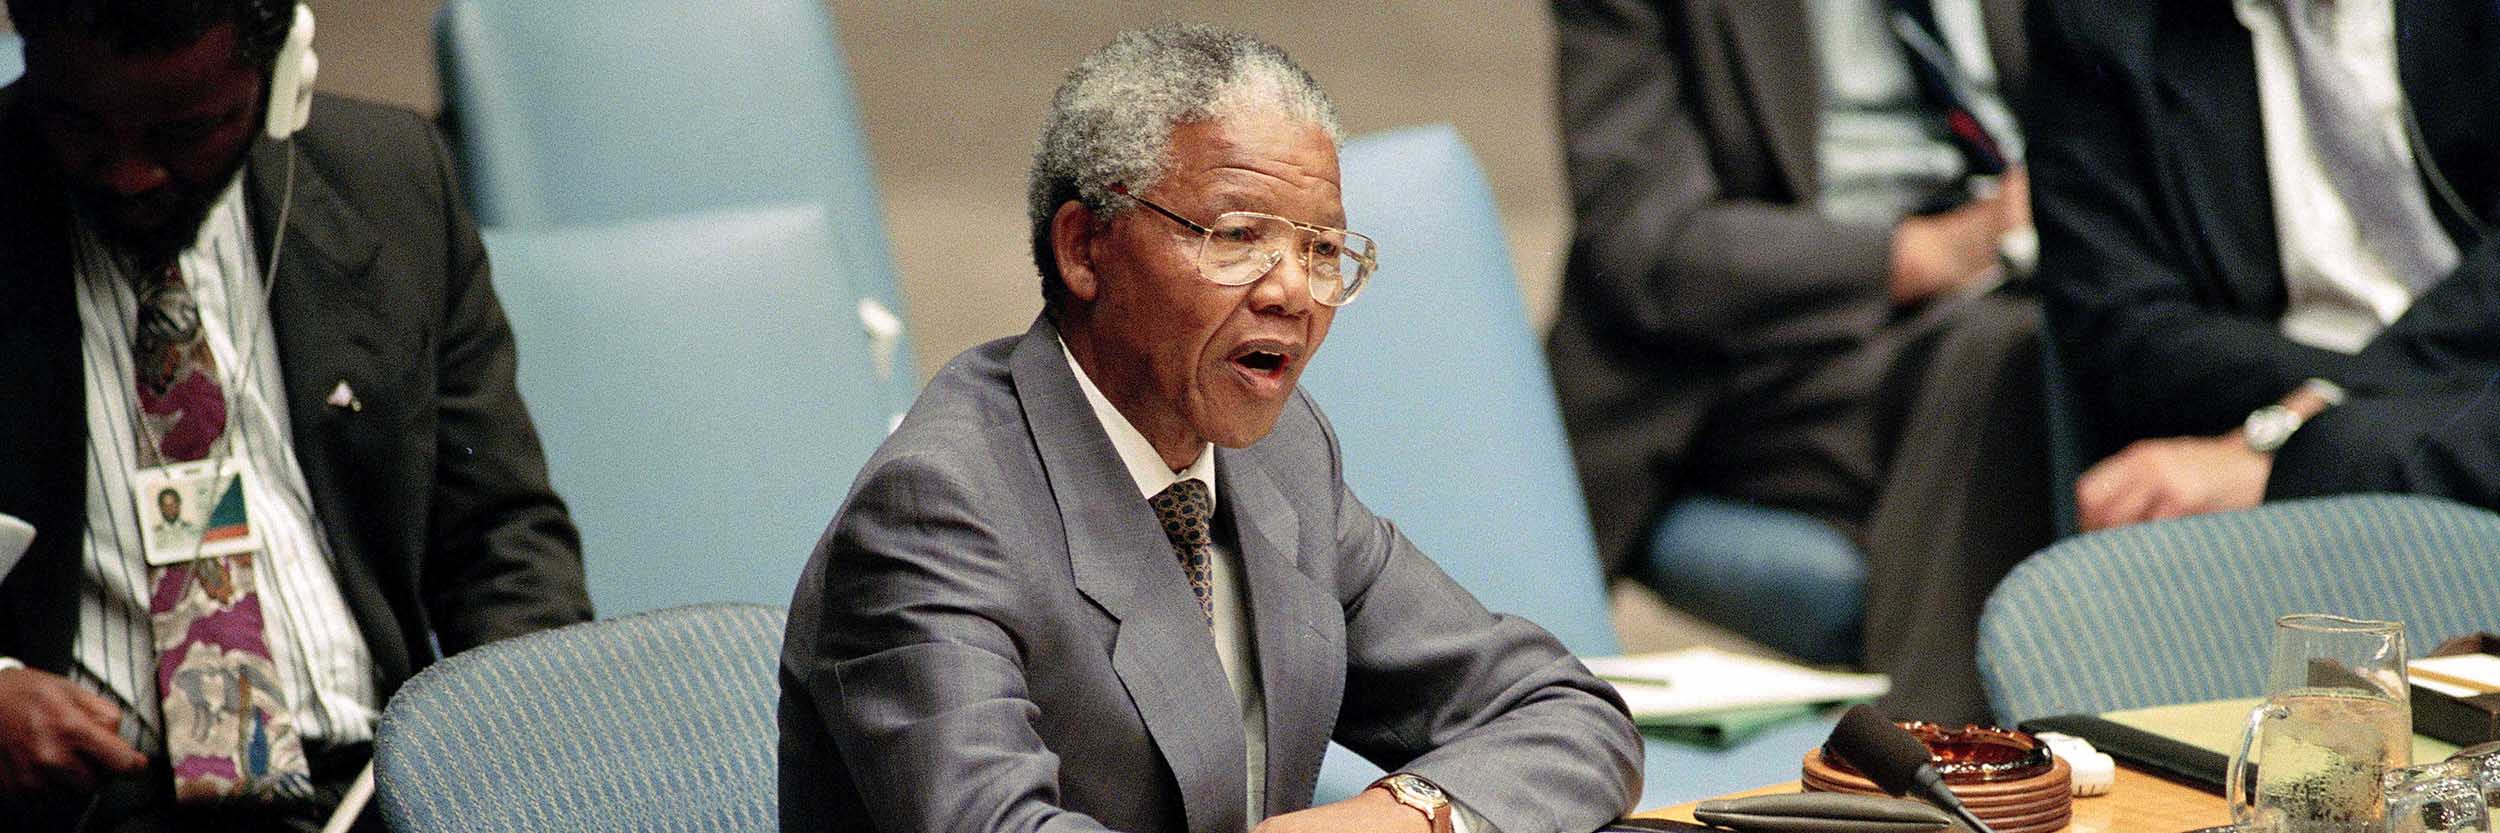 Nelson Mandela, President of the African National Congress (ANC), addresses the Security Council, July 1992